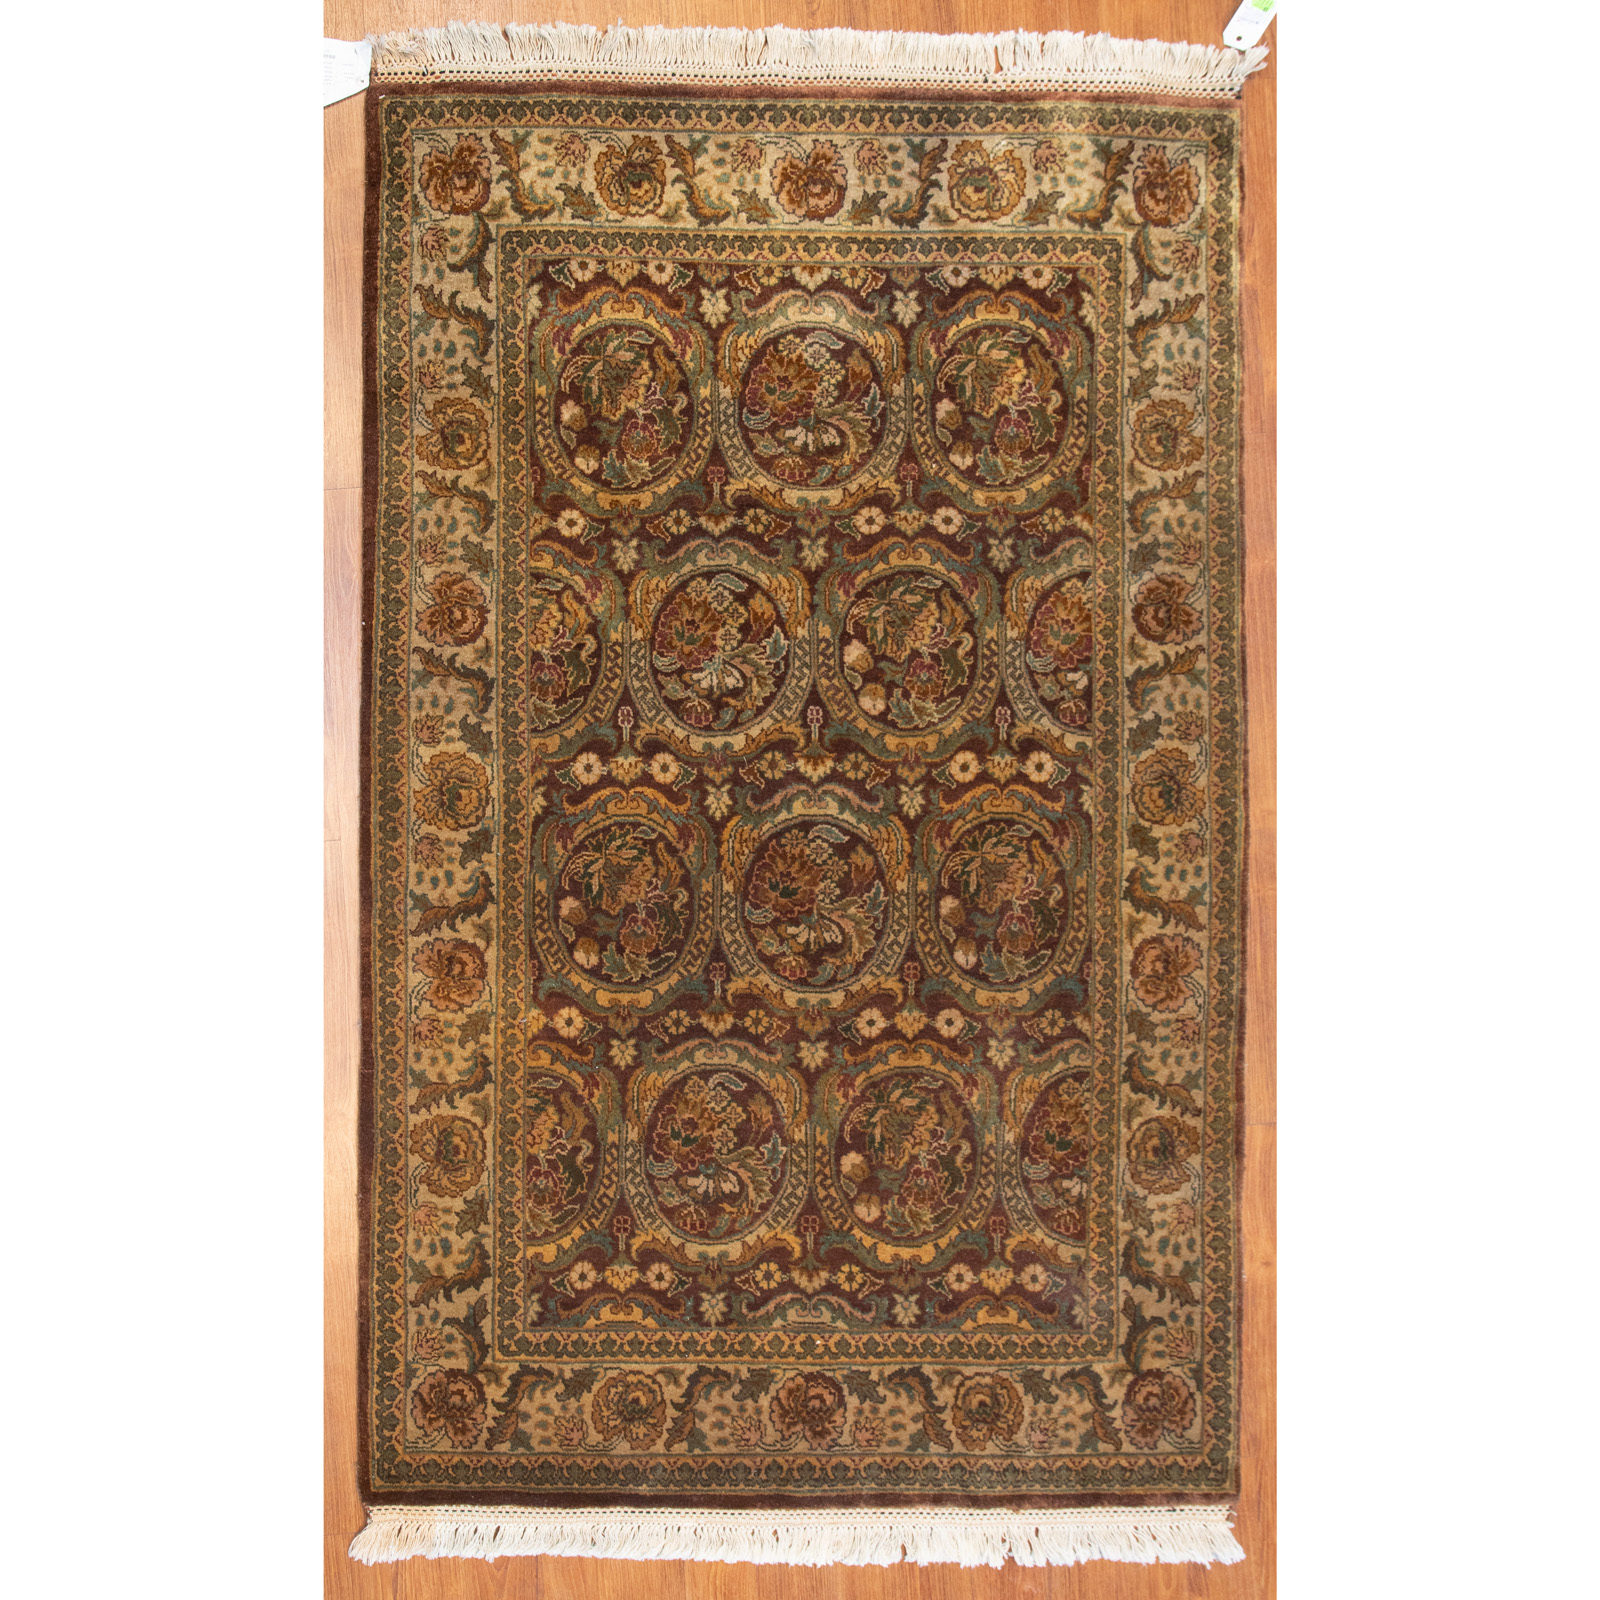 GOLDEN AGE RUG INDIA 4 X 6 2 287320